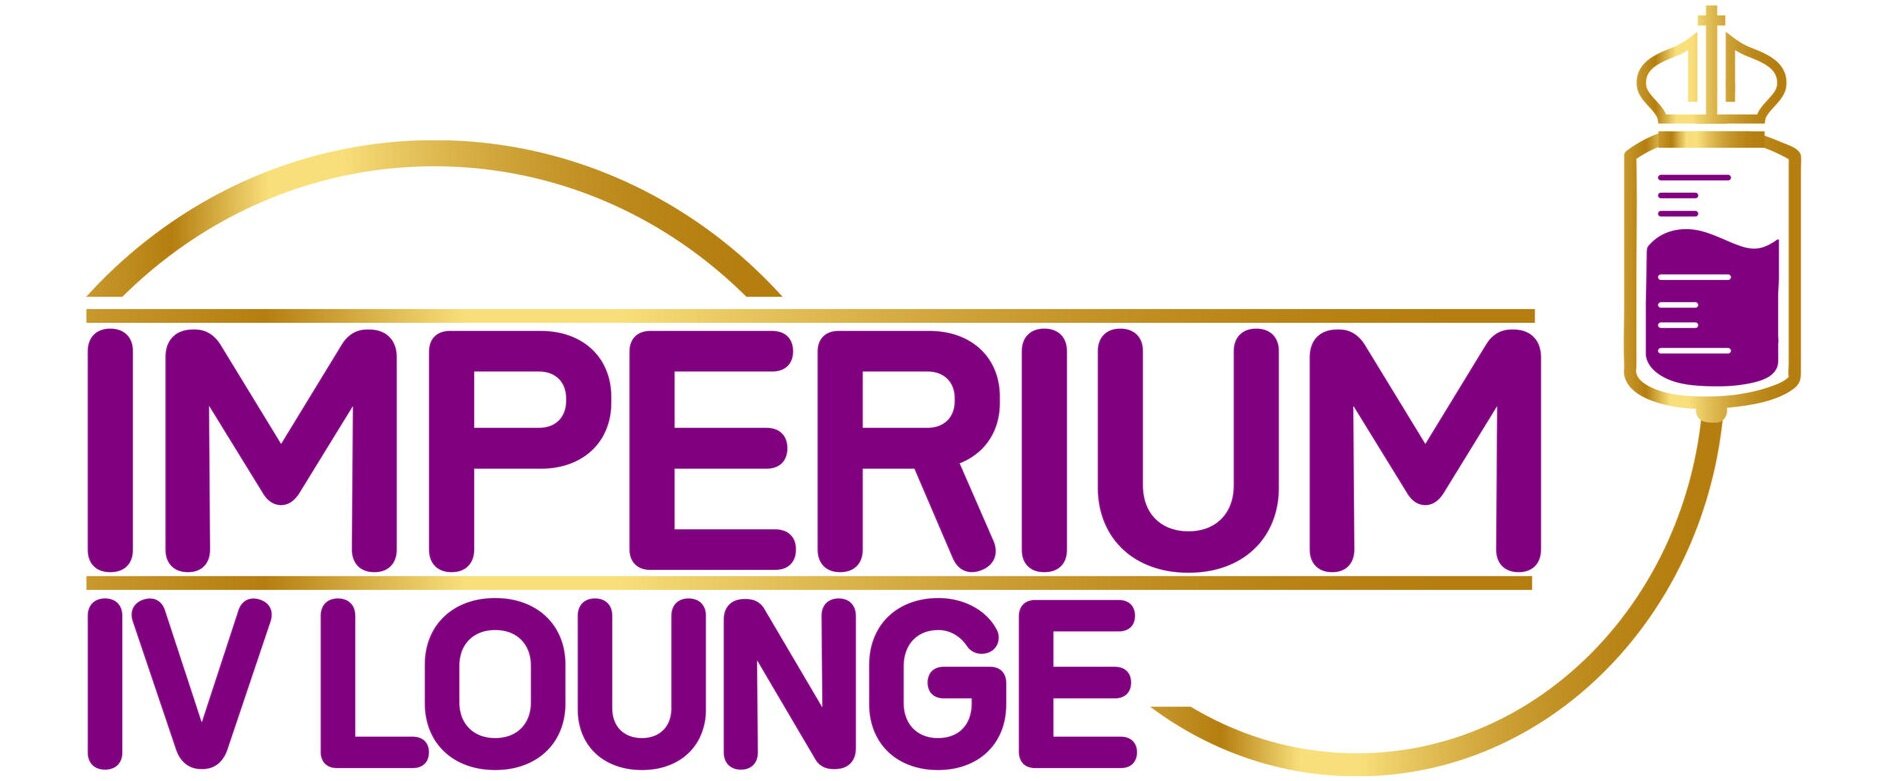 Imperium IV Lounge Sydney IV Drips - Mobile and On-site services